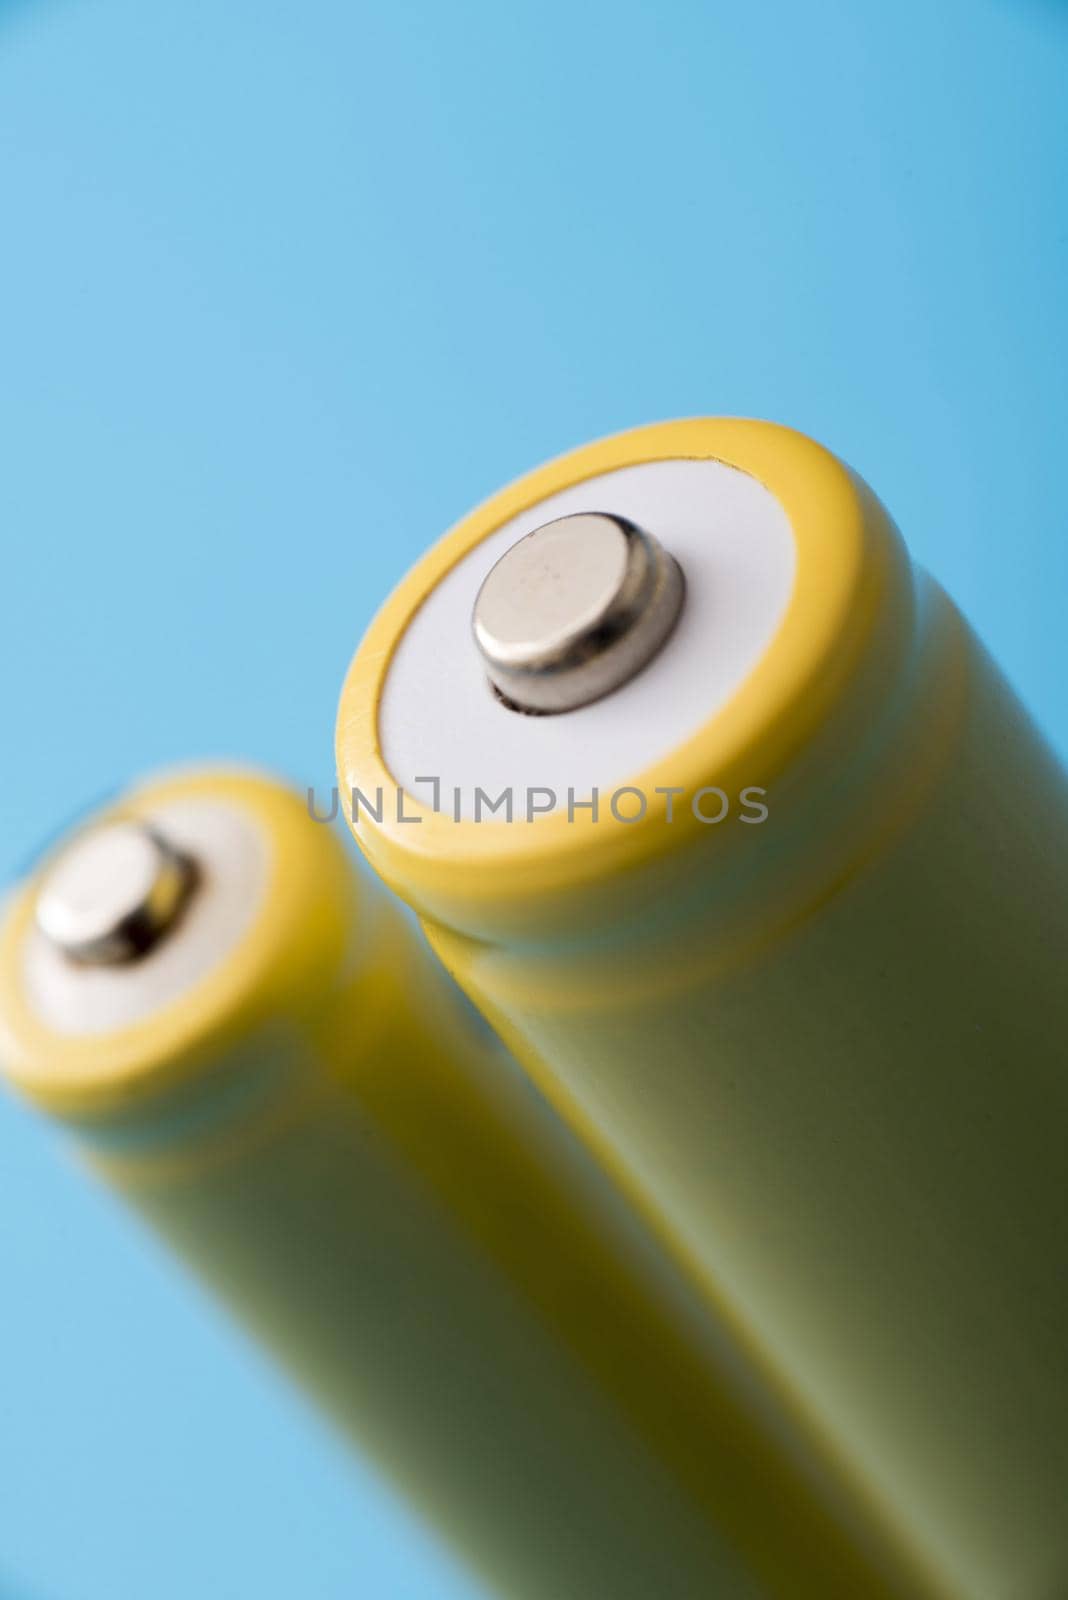 Positive terminal on a rechargeable battery by sanisra